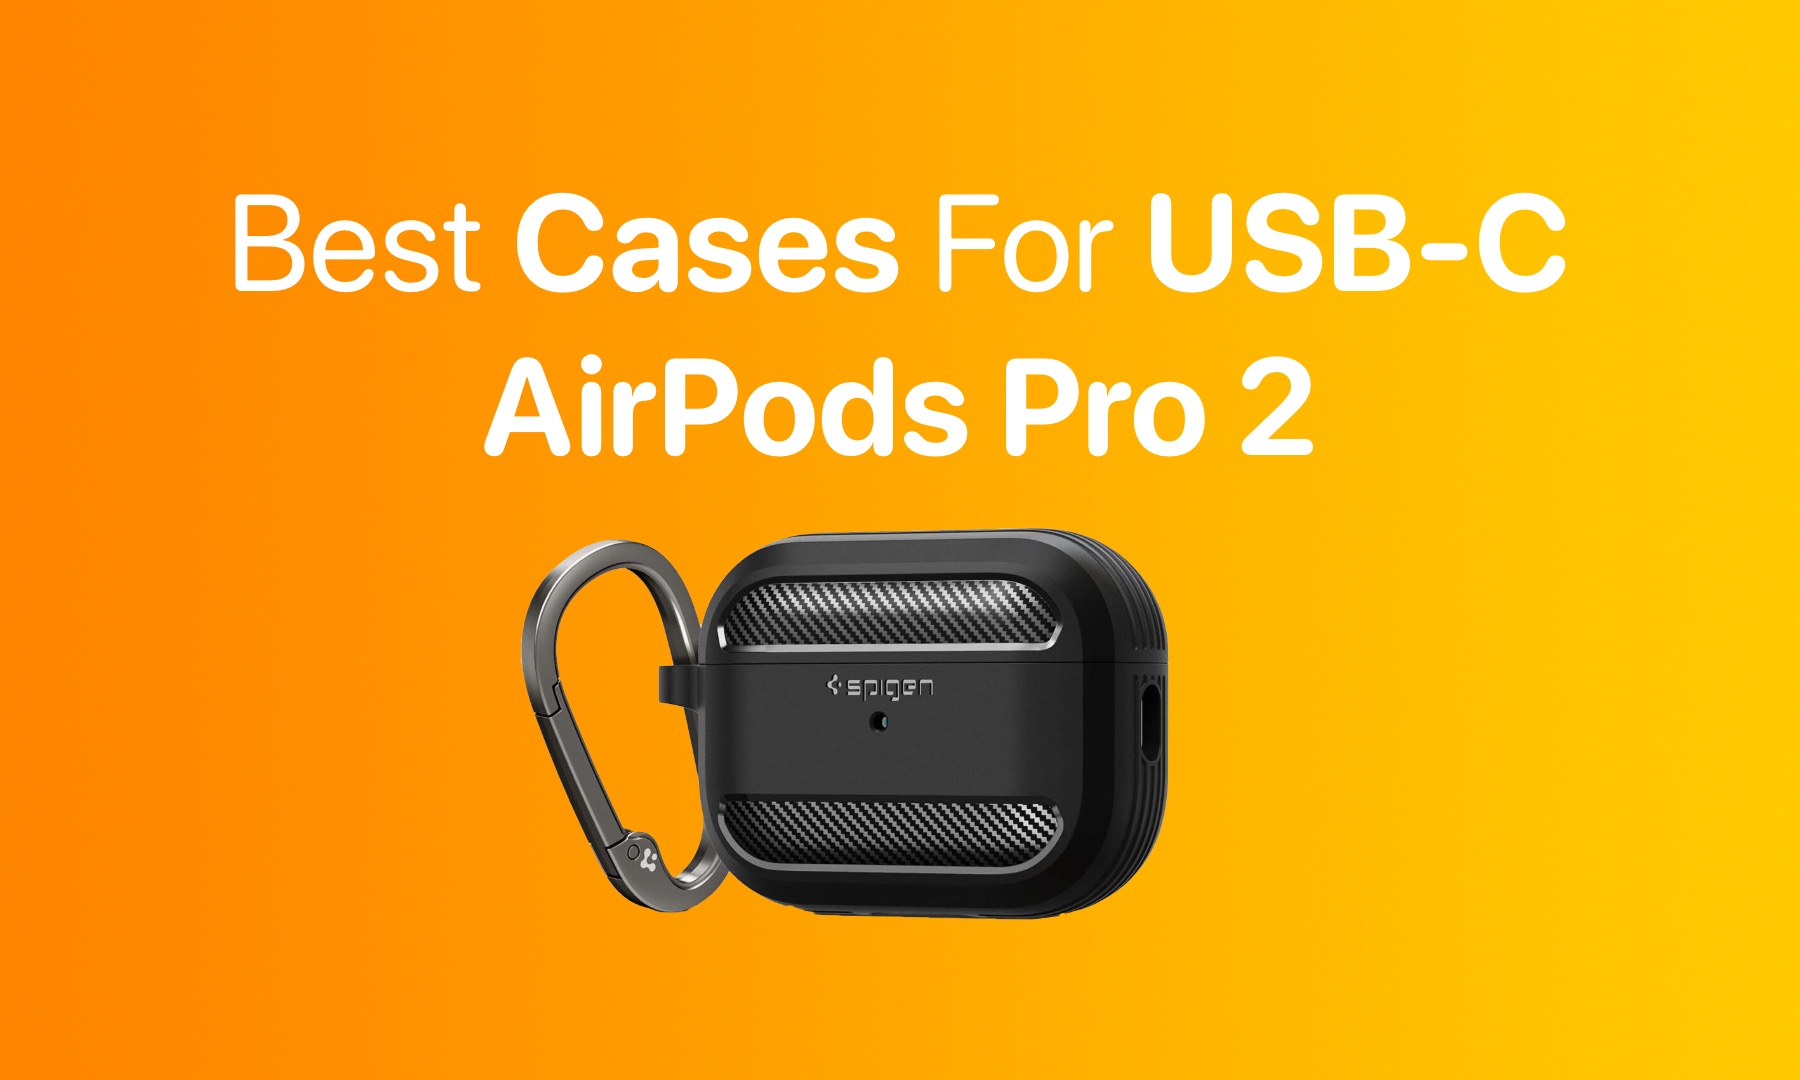 You can now buy an AirPods Pro 2 case without the earbuds